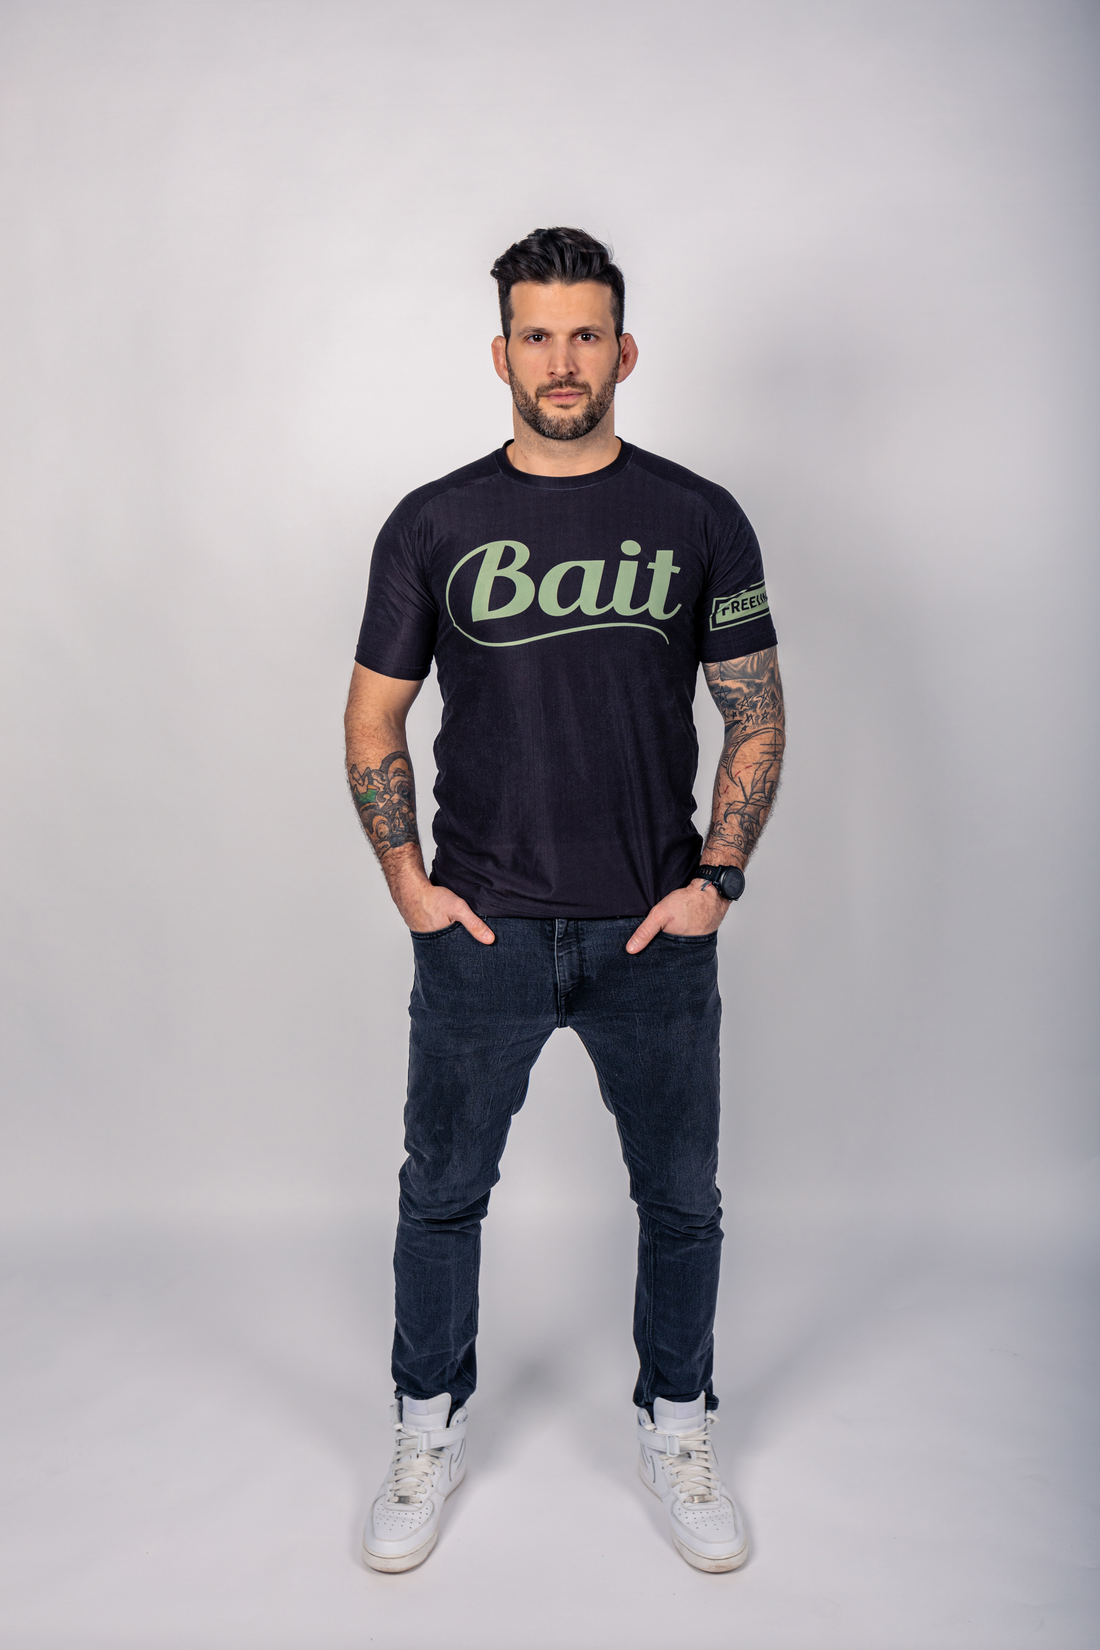 Bait and Green Tee